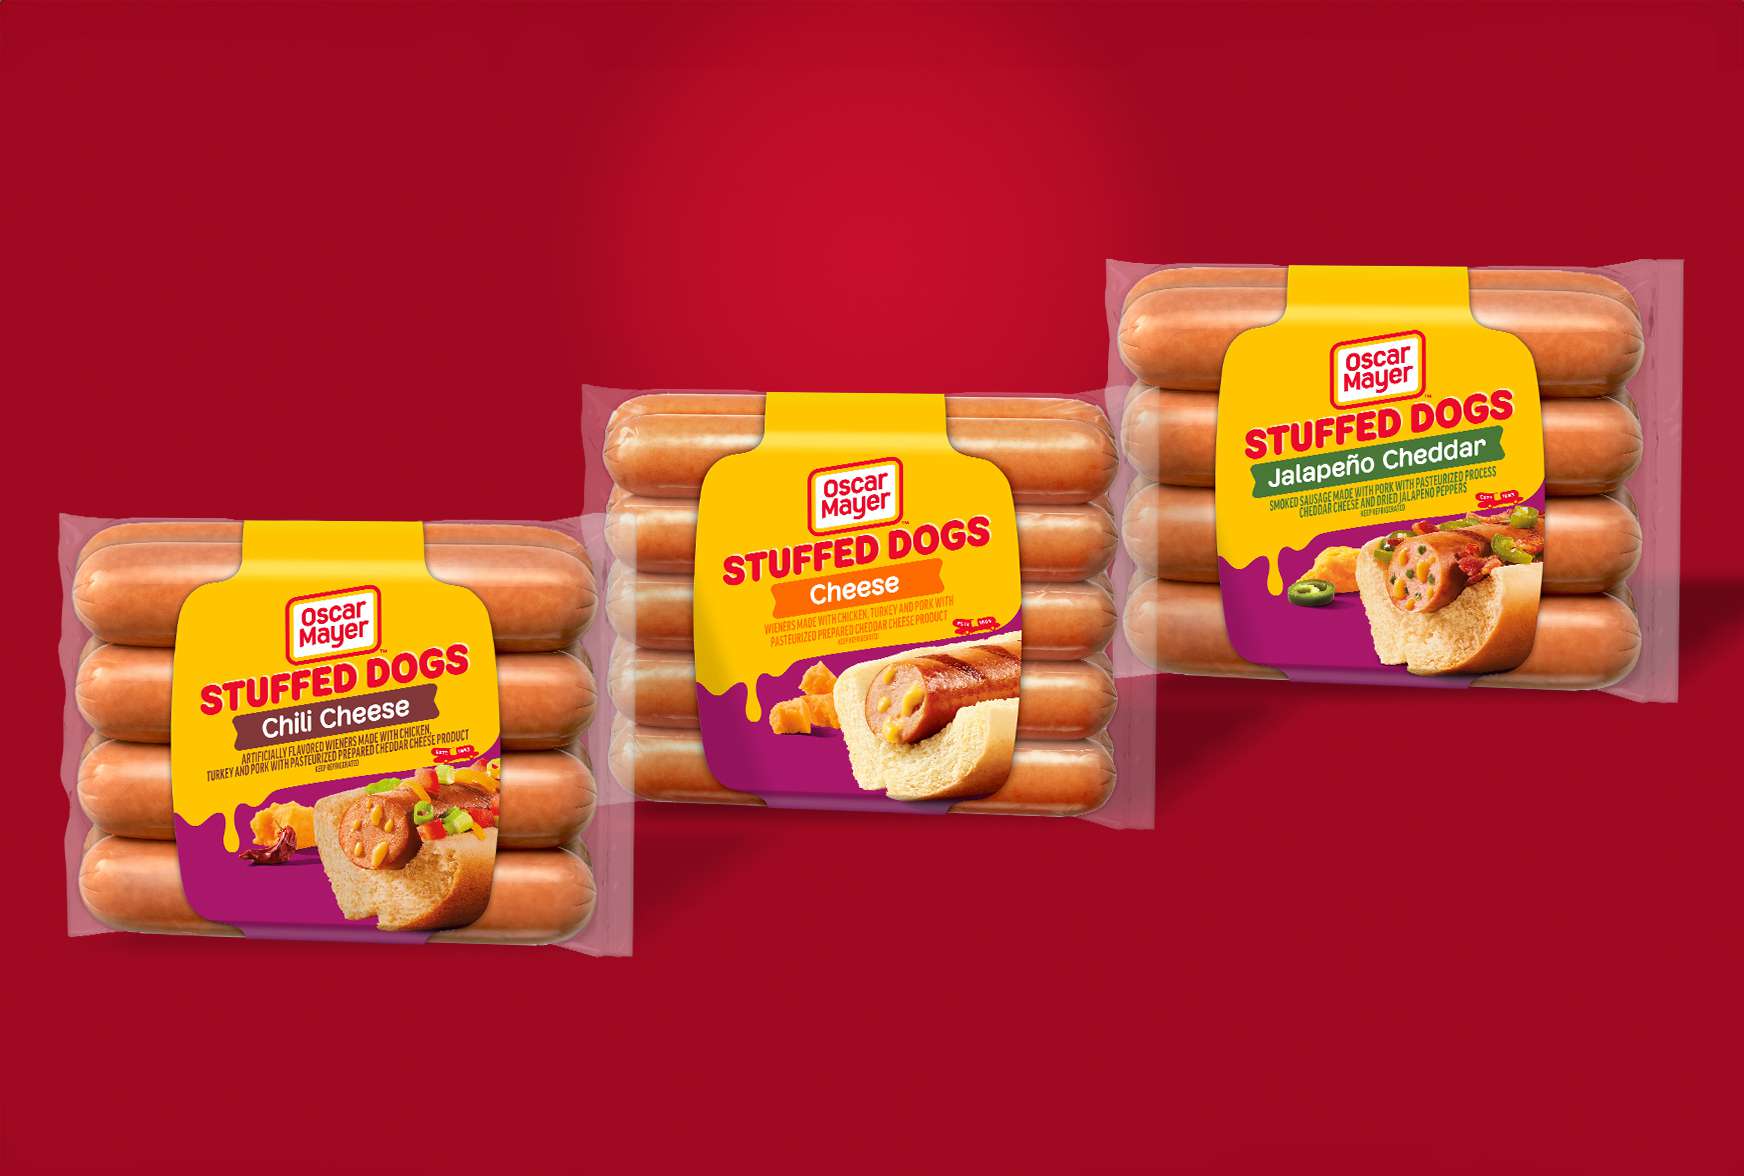 oscar mayer is dropping 3 flavors of stuffed hot dogs just in time for summer